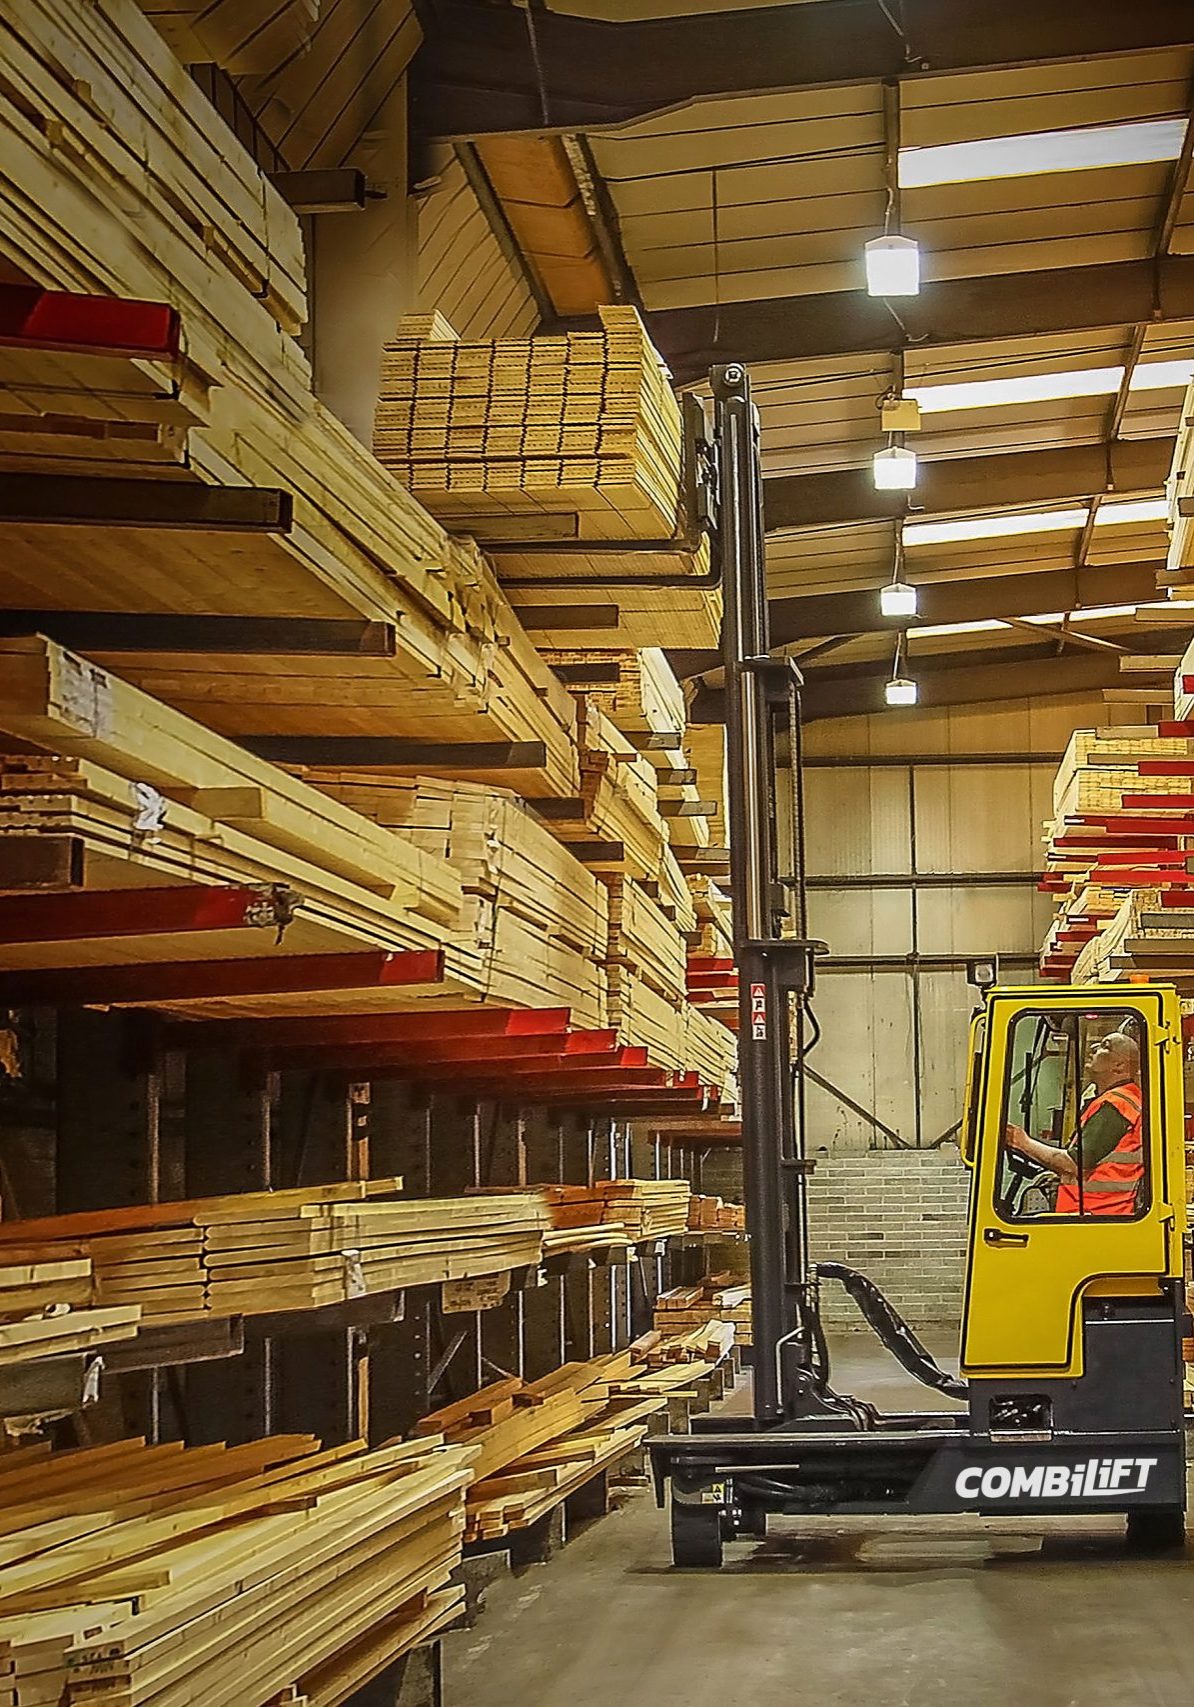 Combilift C4000 multi-directional forklift in use (warehousing & timber)